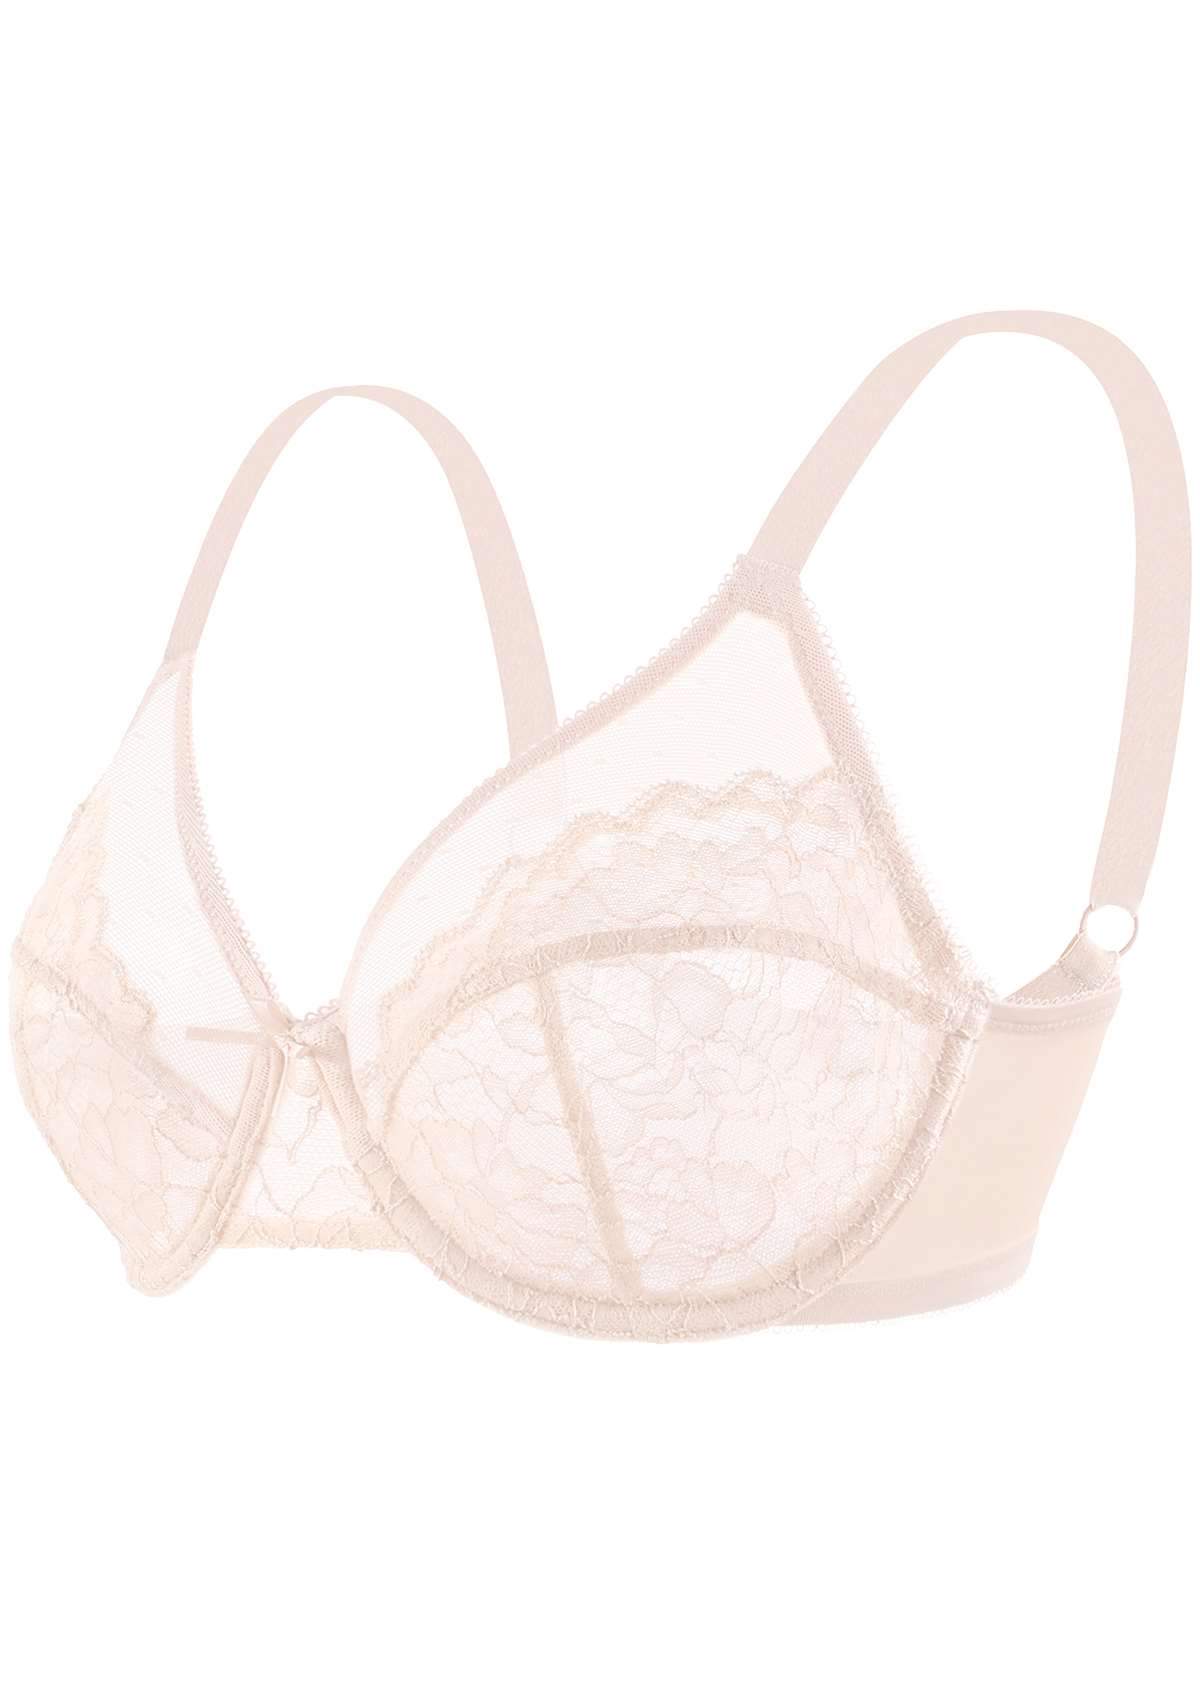 HSIA Enchante Lacy Bra: Comfy Sheer Lace Bra With Lift - Pink / 46 / DDD/F